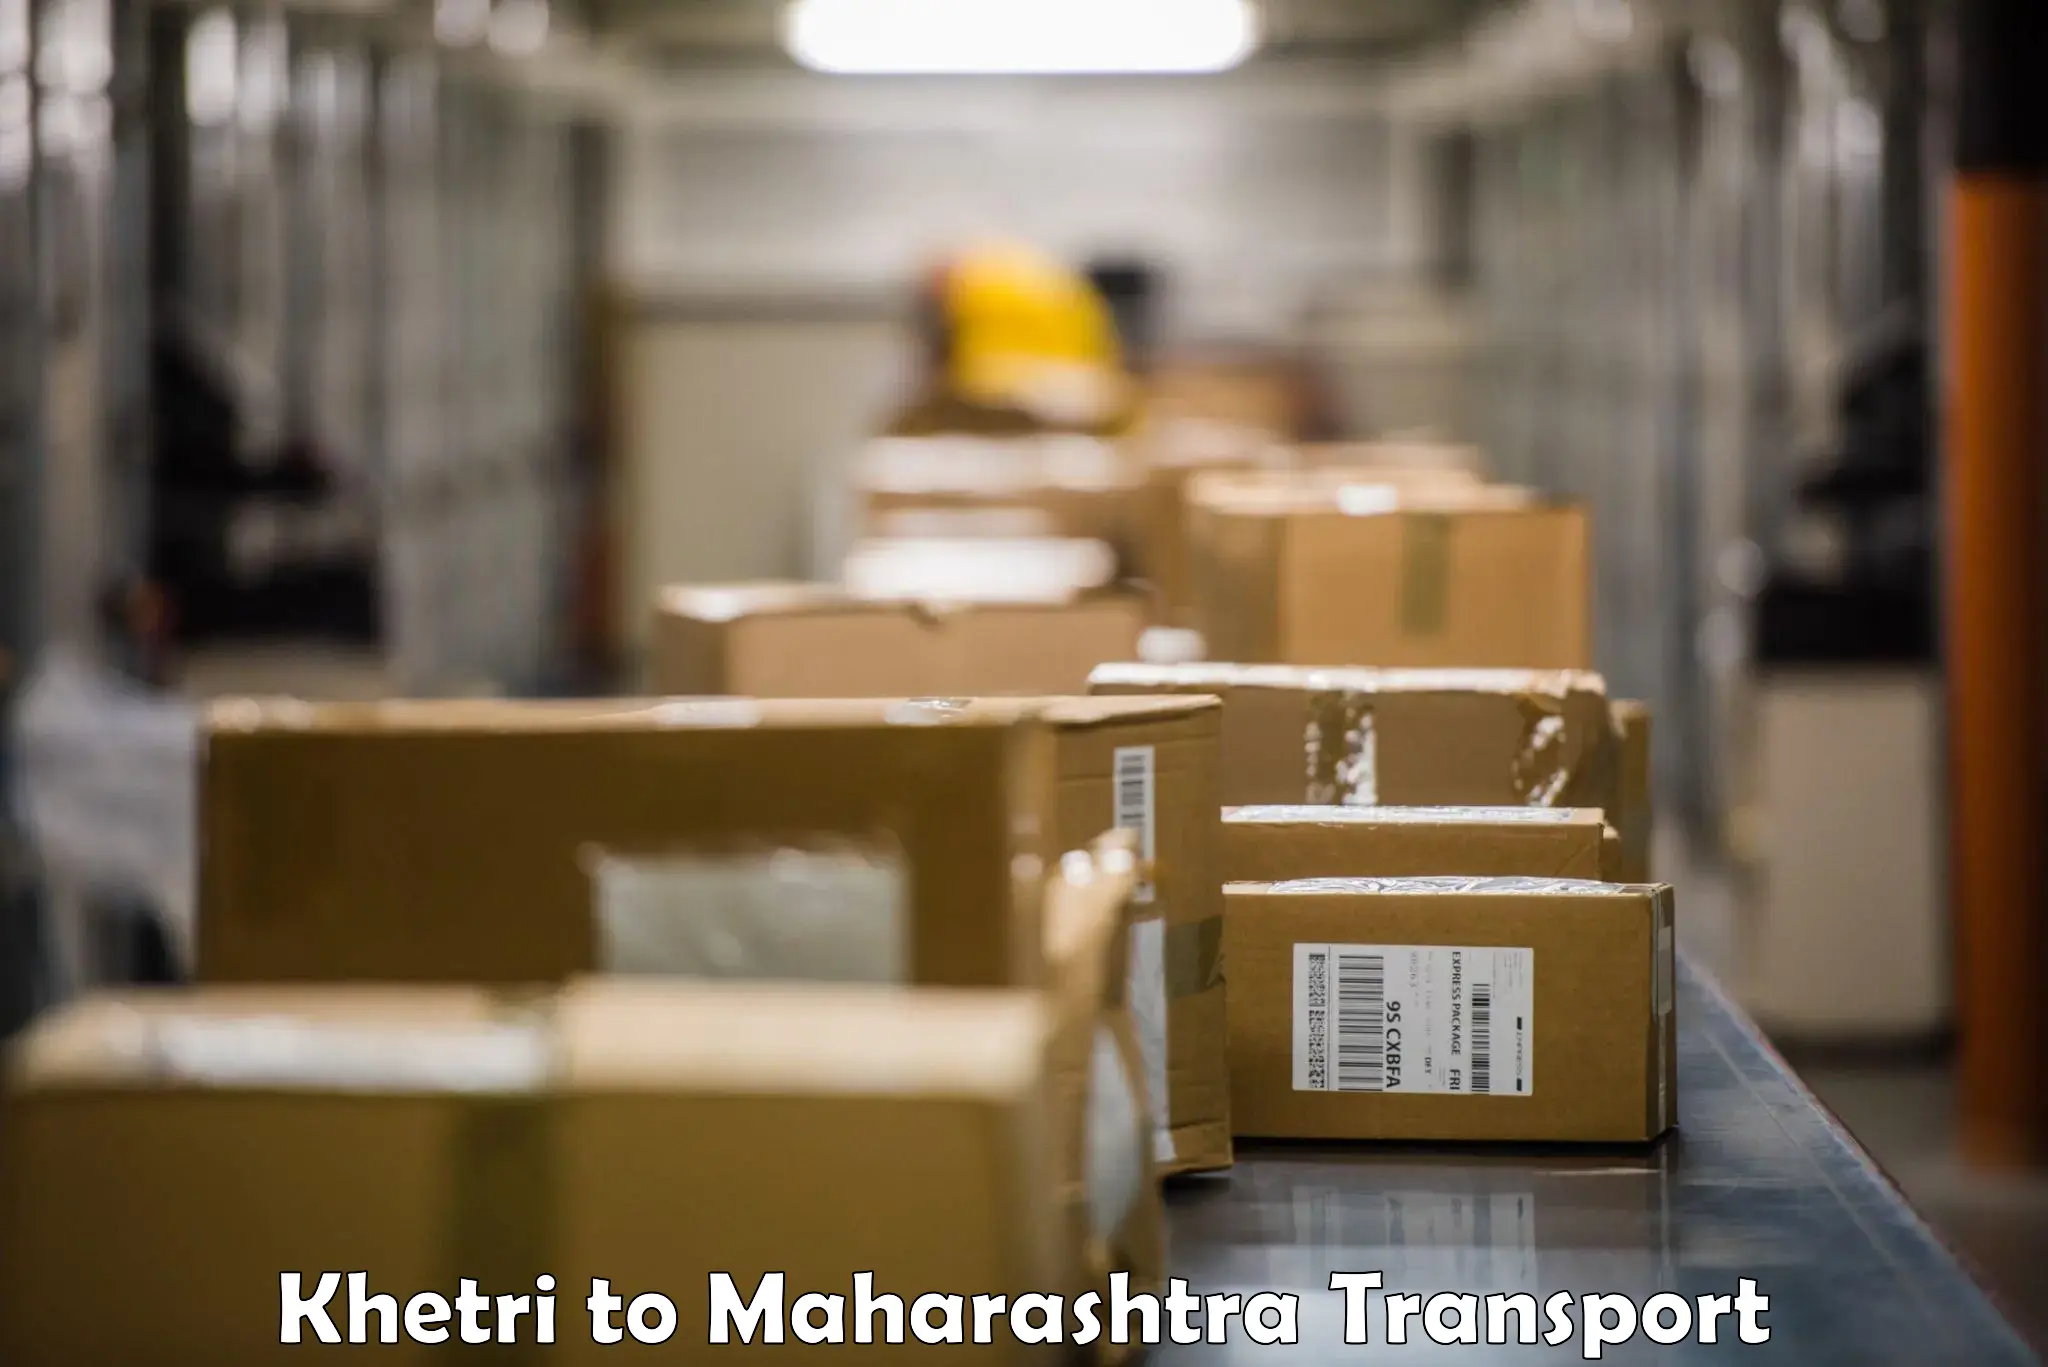 Goods delivery service Khetri to Andheri